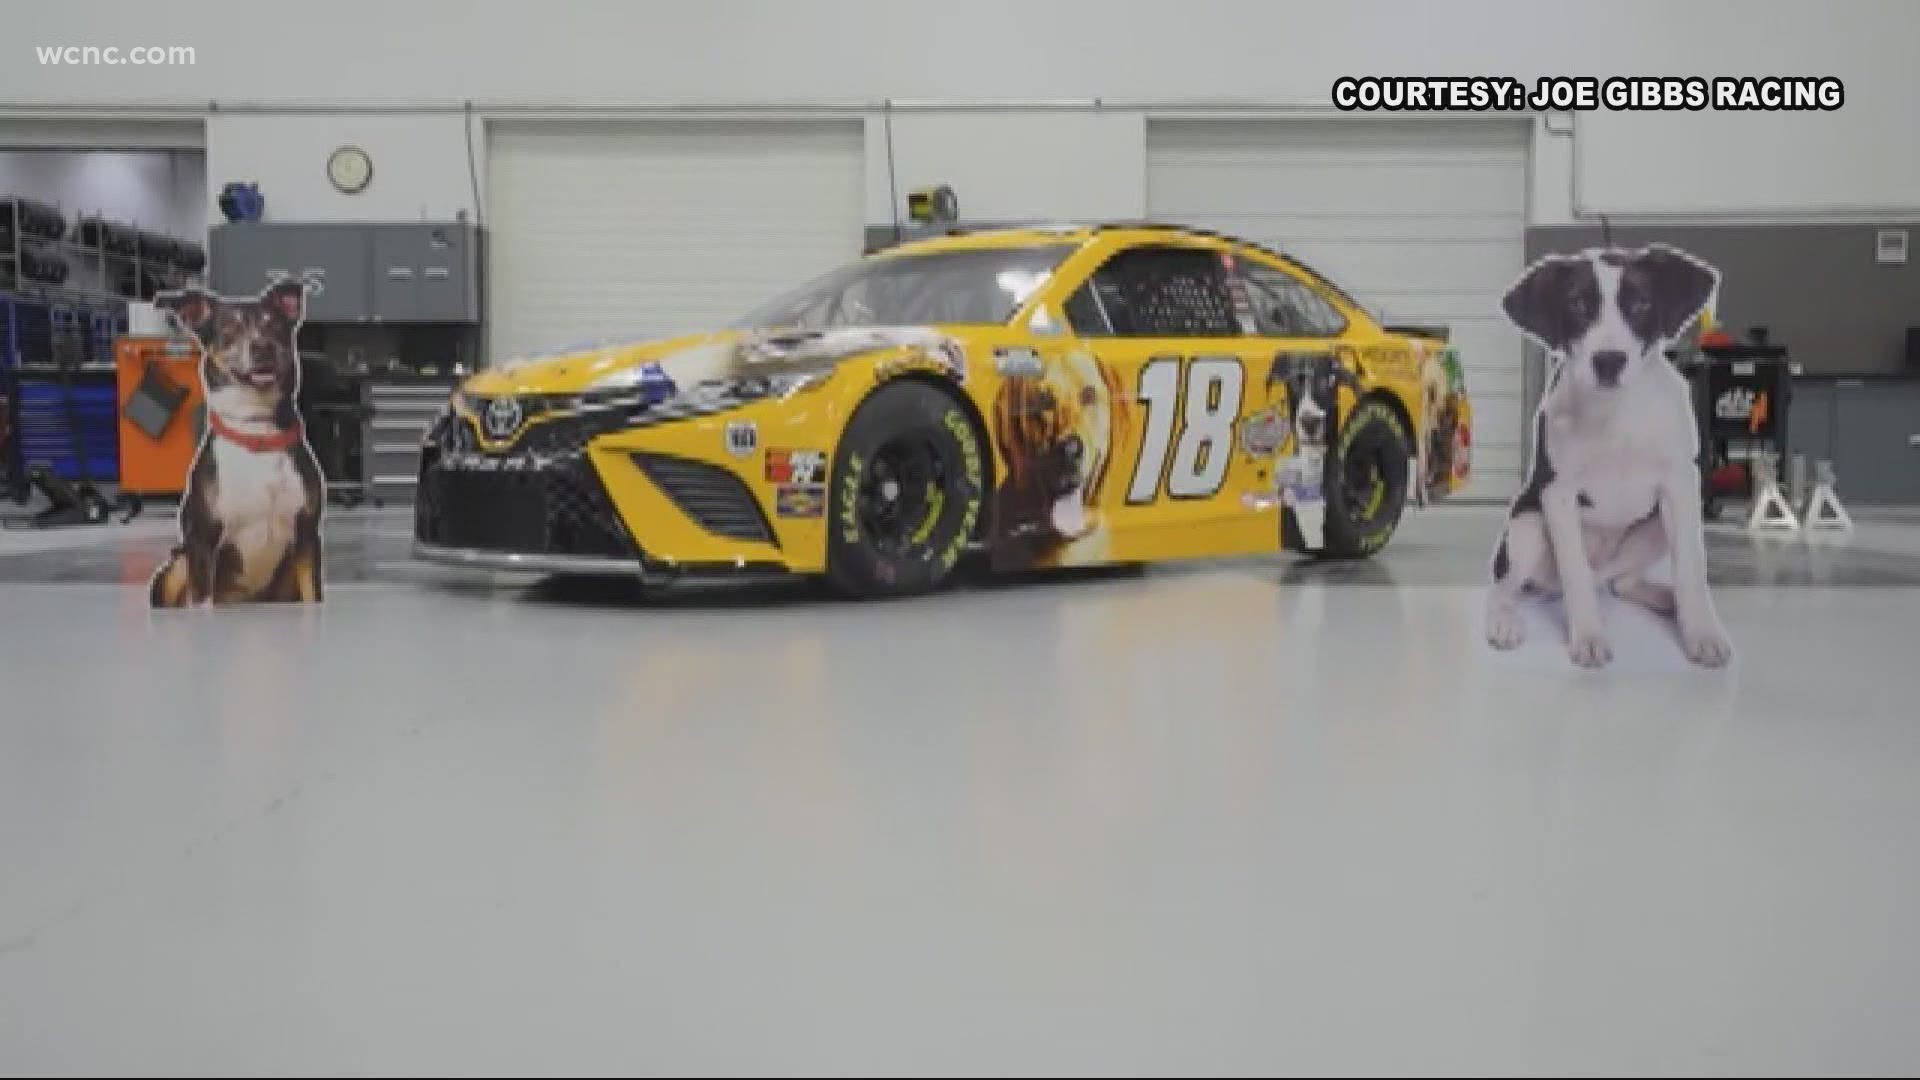 Kyle Busch, 2X NASCAR Cup Series Champion, is heading to Nashville with a new car design that features seven adoptable dogs from the Charlotte and Nashville area.